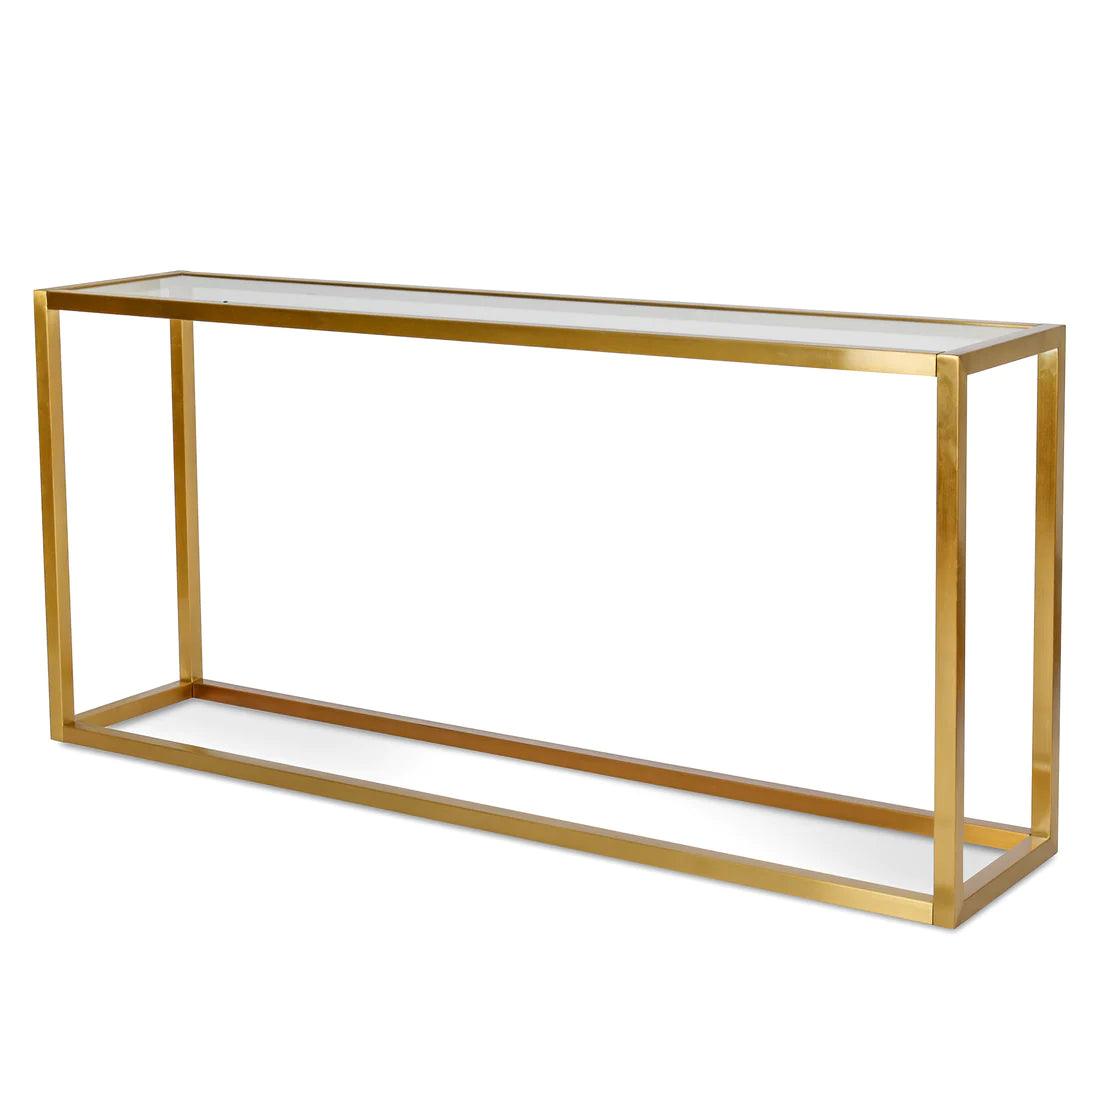 1.6M Glass Console Table - Tempered Glass - Steel Base - Furniture Castle